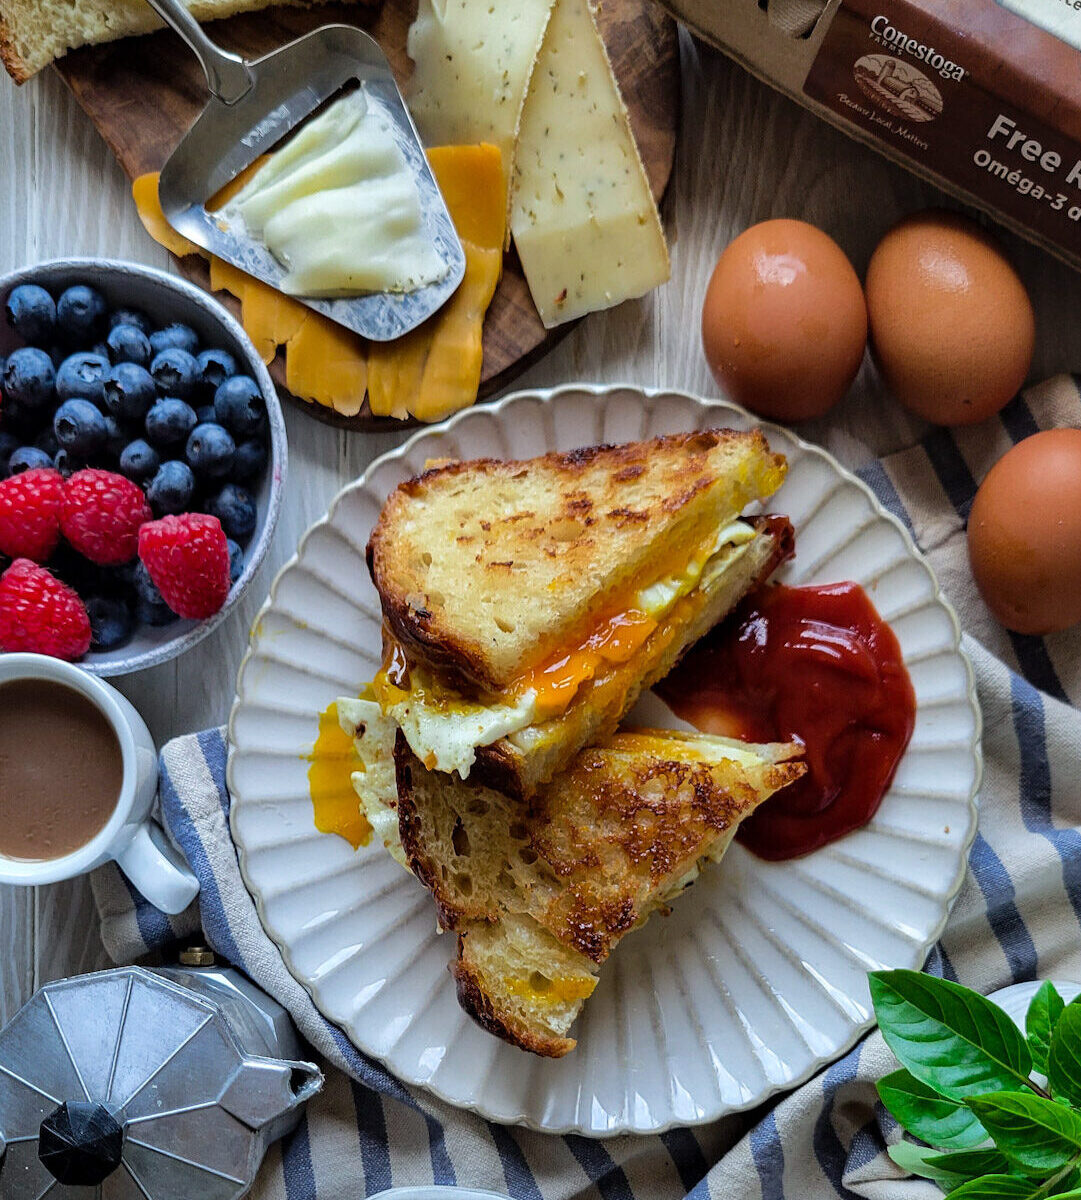 Fried Egg Grilled Cheese sandwich on a plate, surrounded by a bowl of fruit, espresso, cheese and eggs.